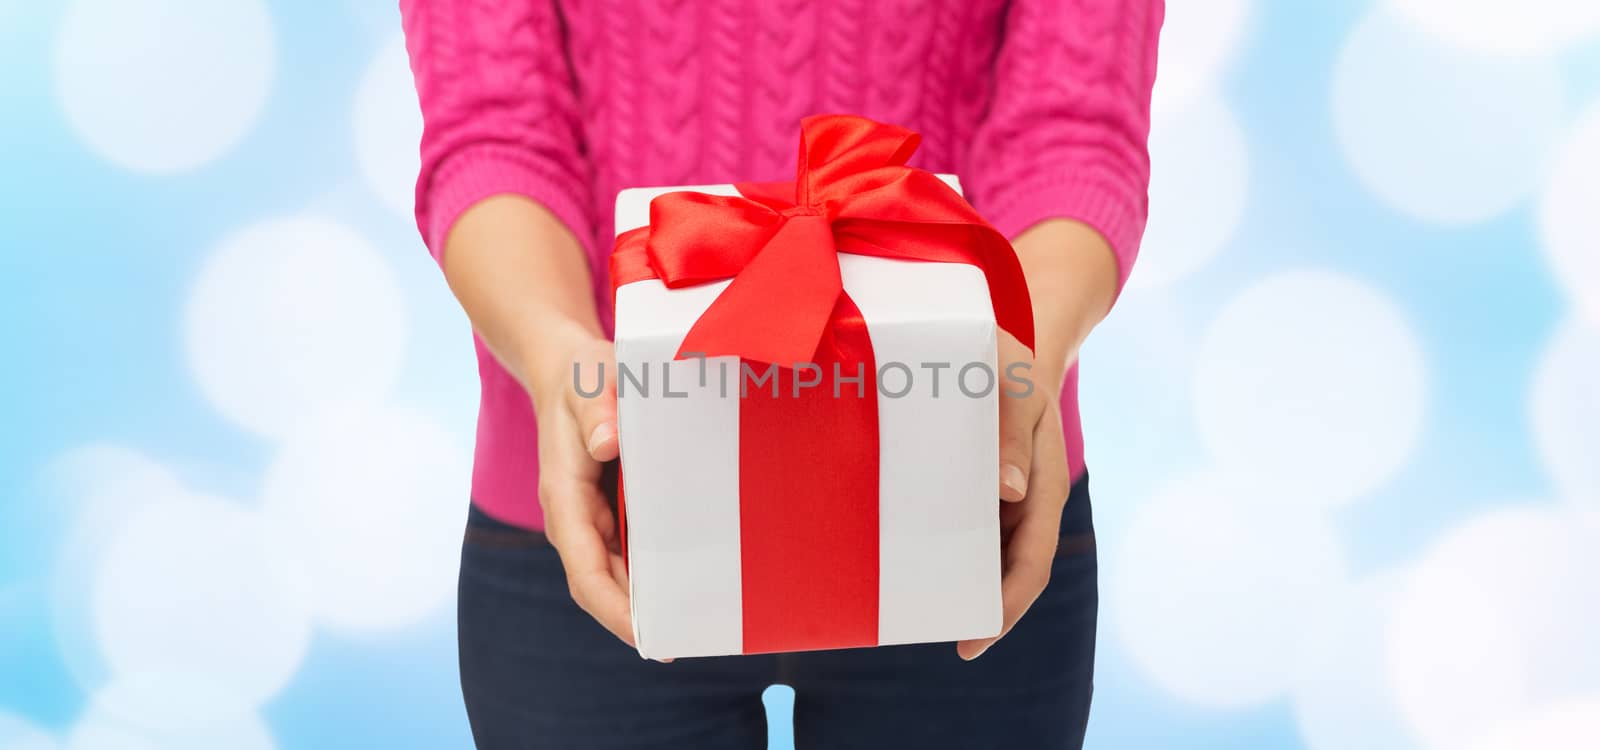 christmas, holidays and people concept - close up of woman in pink sweater holding gift box over blue lights background